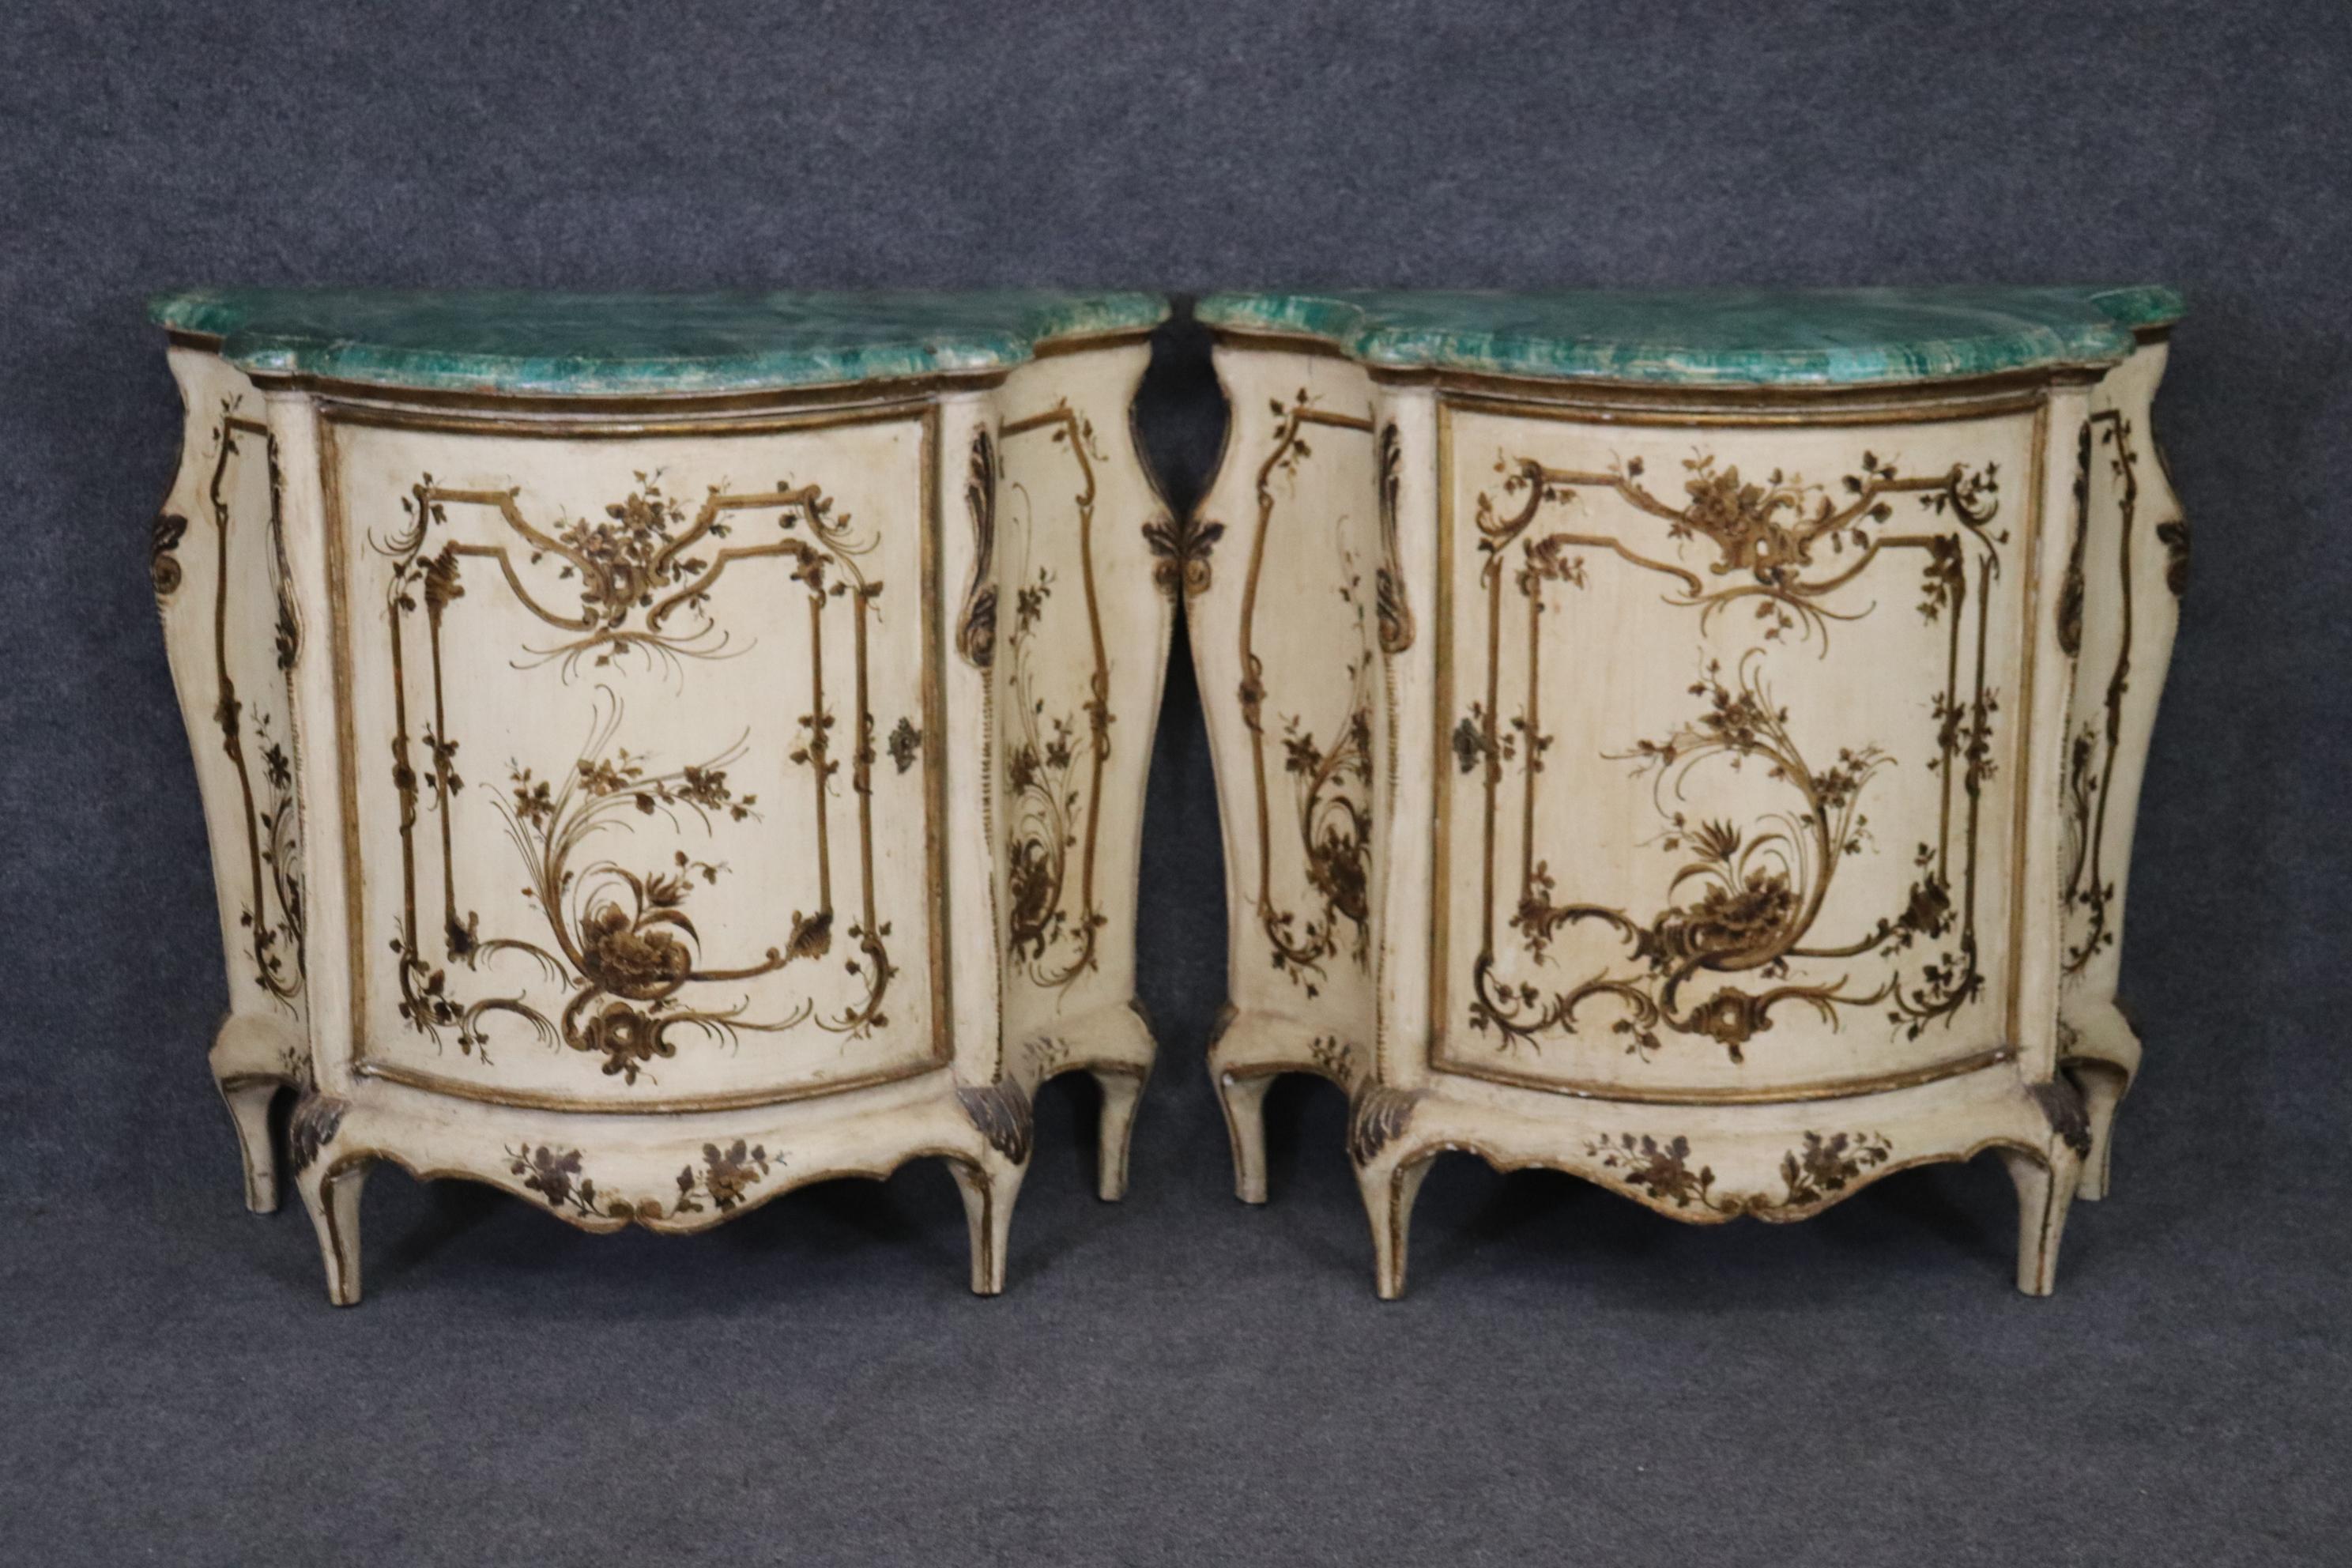 This is a very rare and beautifully painted pair of faux malachite nightstands in the Venetian taste and from Italy and labeled from Italy. The stands are expertly painted in a faux malachite finish with a cream finish and additional decoration. The